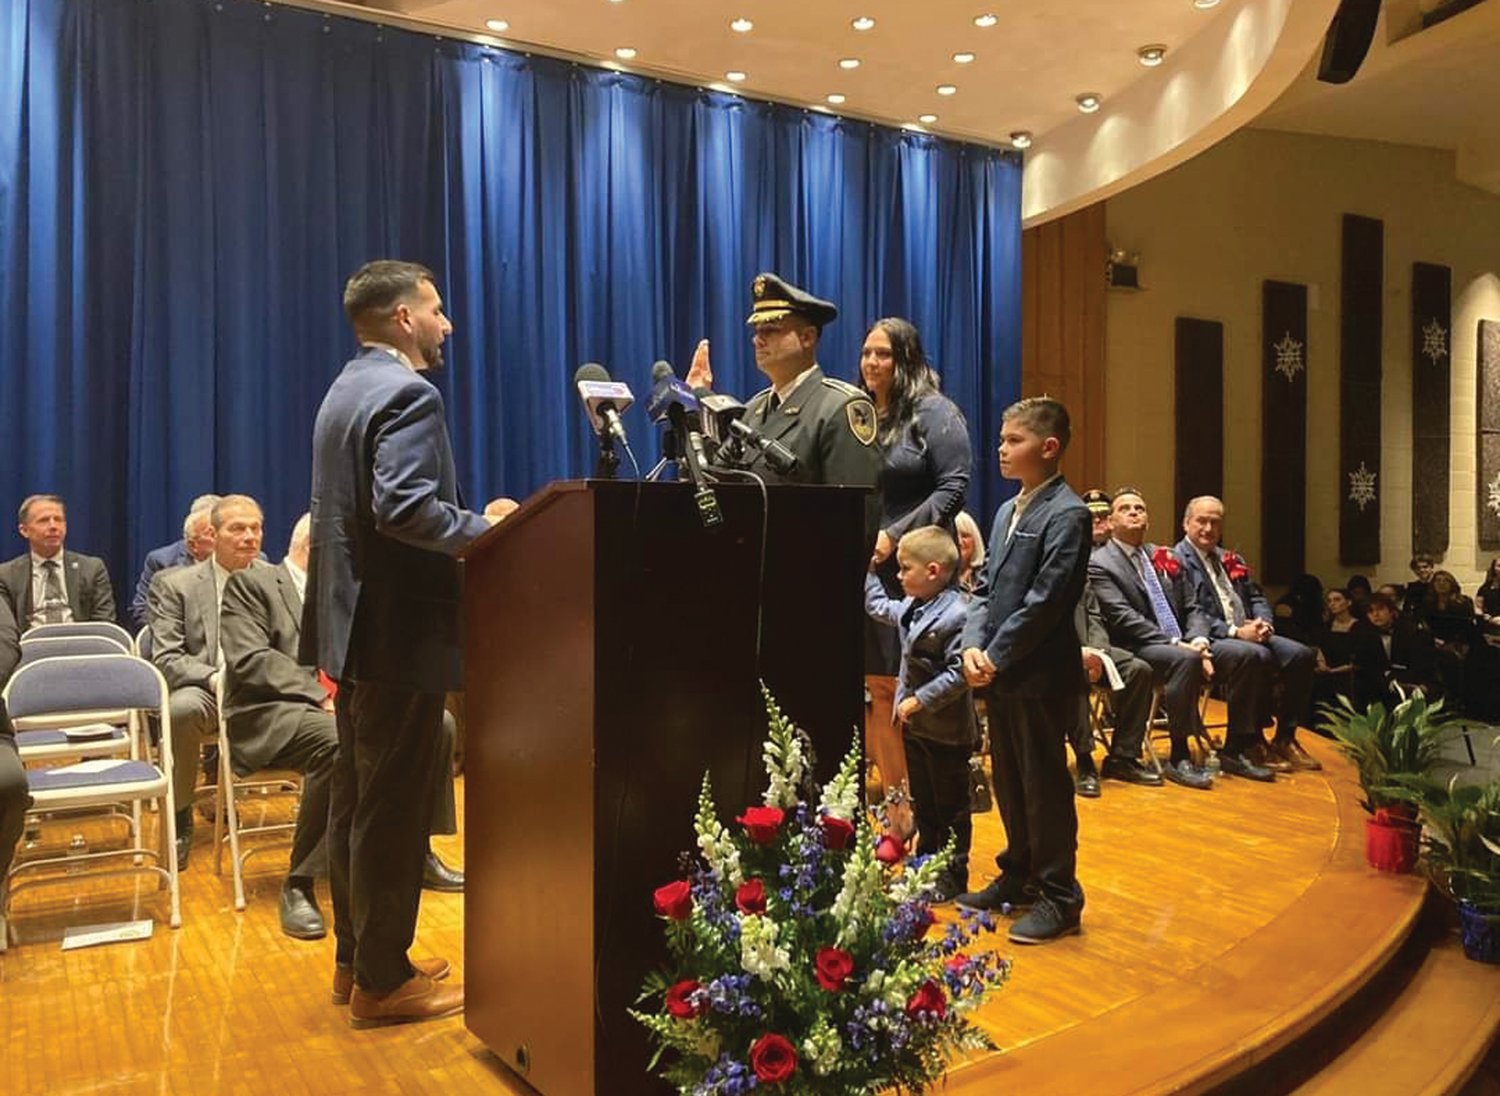 NEW CHIEF: Former Johnston Police Deputy Chief Mark A. Vieira was promoted to Police Chief Monday night. His family accompanied him on stage for his swearing-in. The auditorium was packed with the Ocean State’s top law enforcement officials, and nearly the entire JPD rank and file.